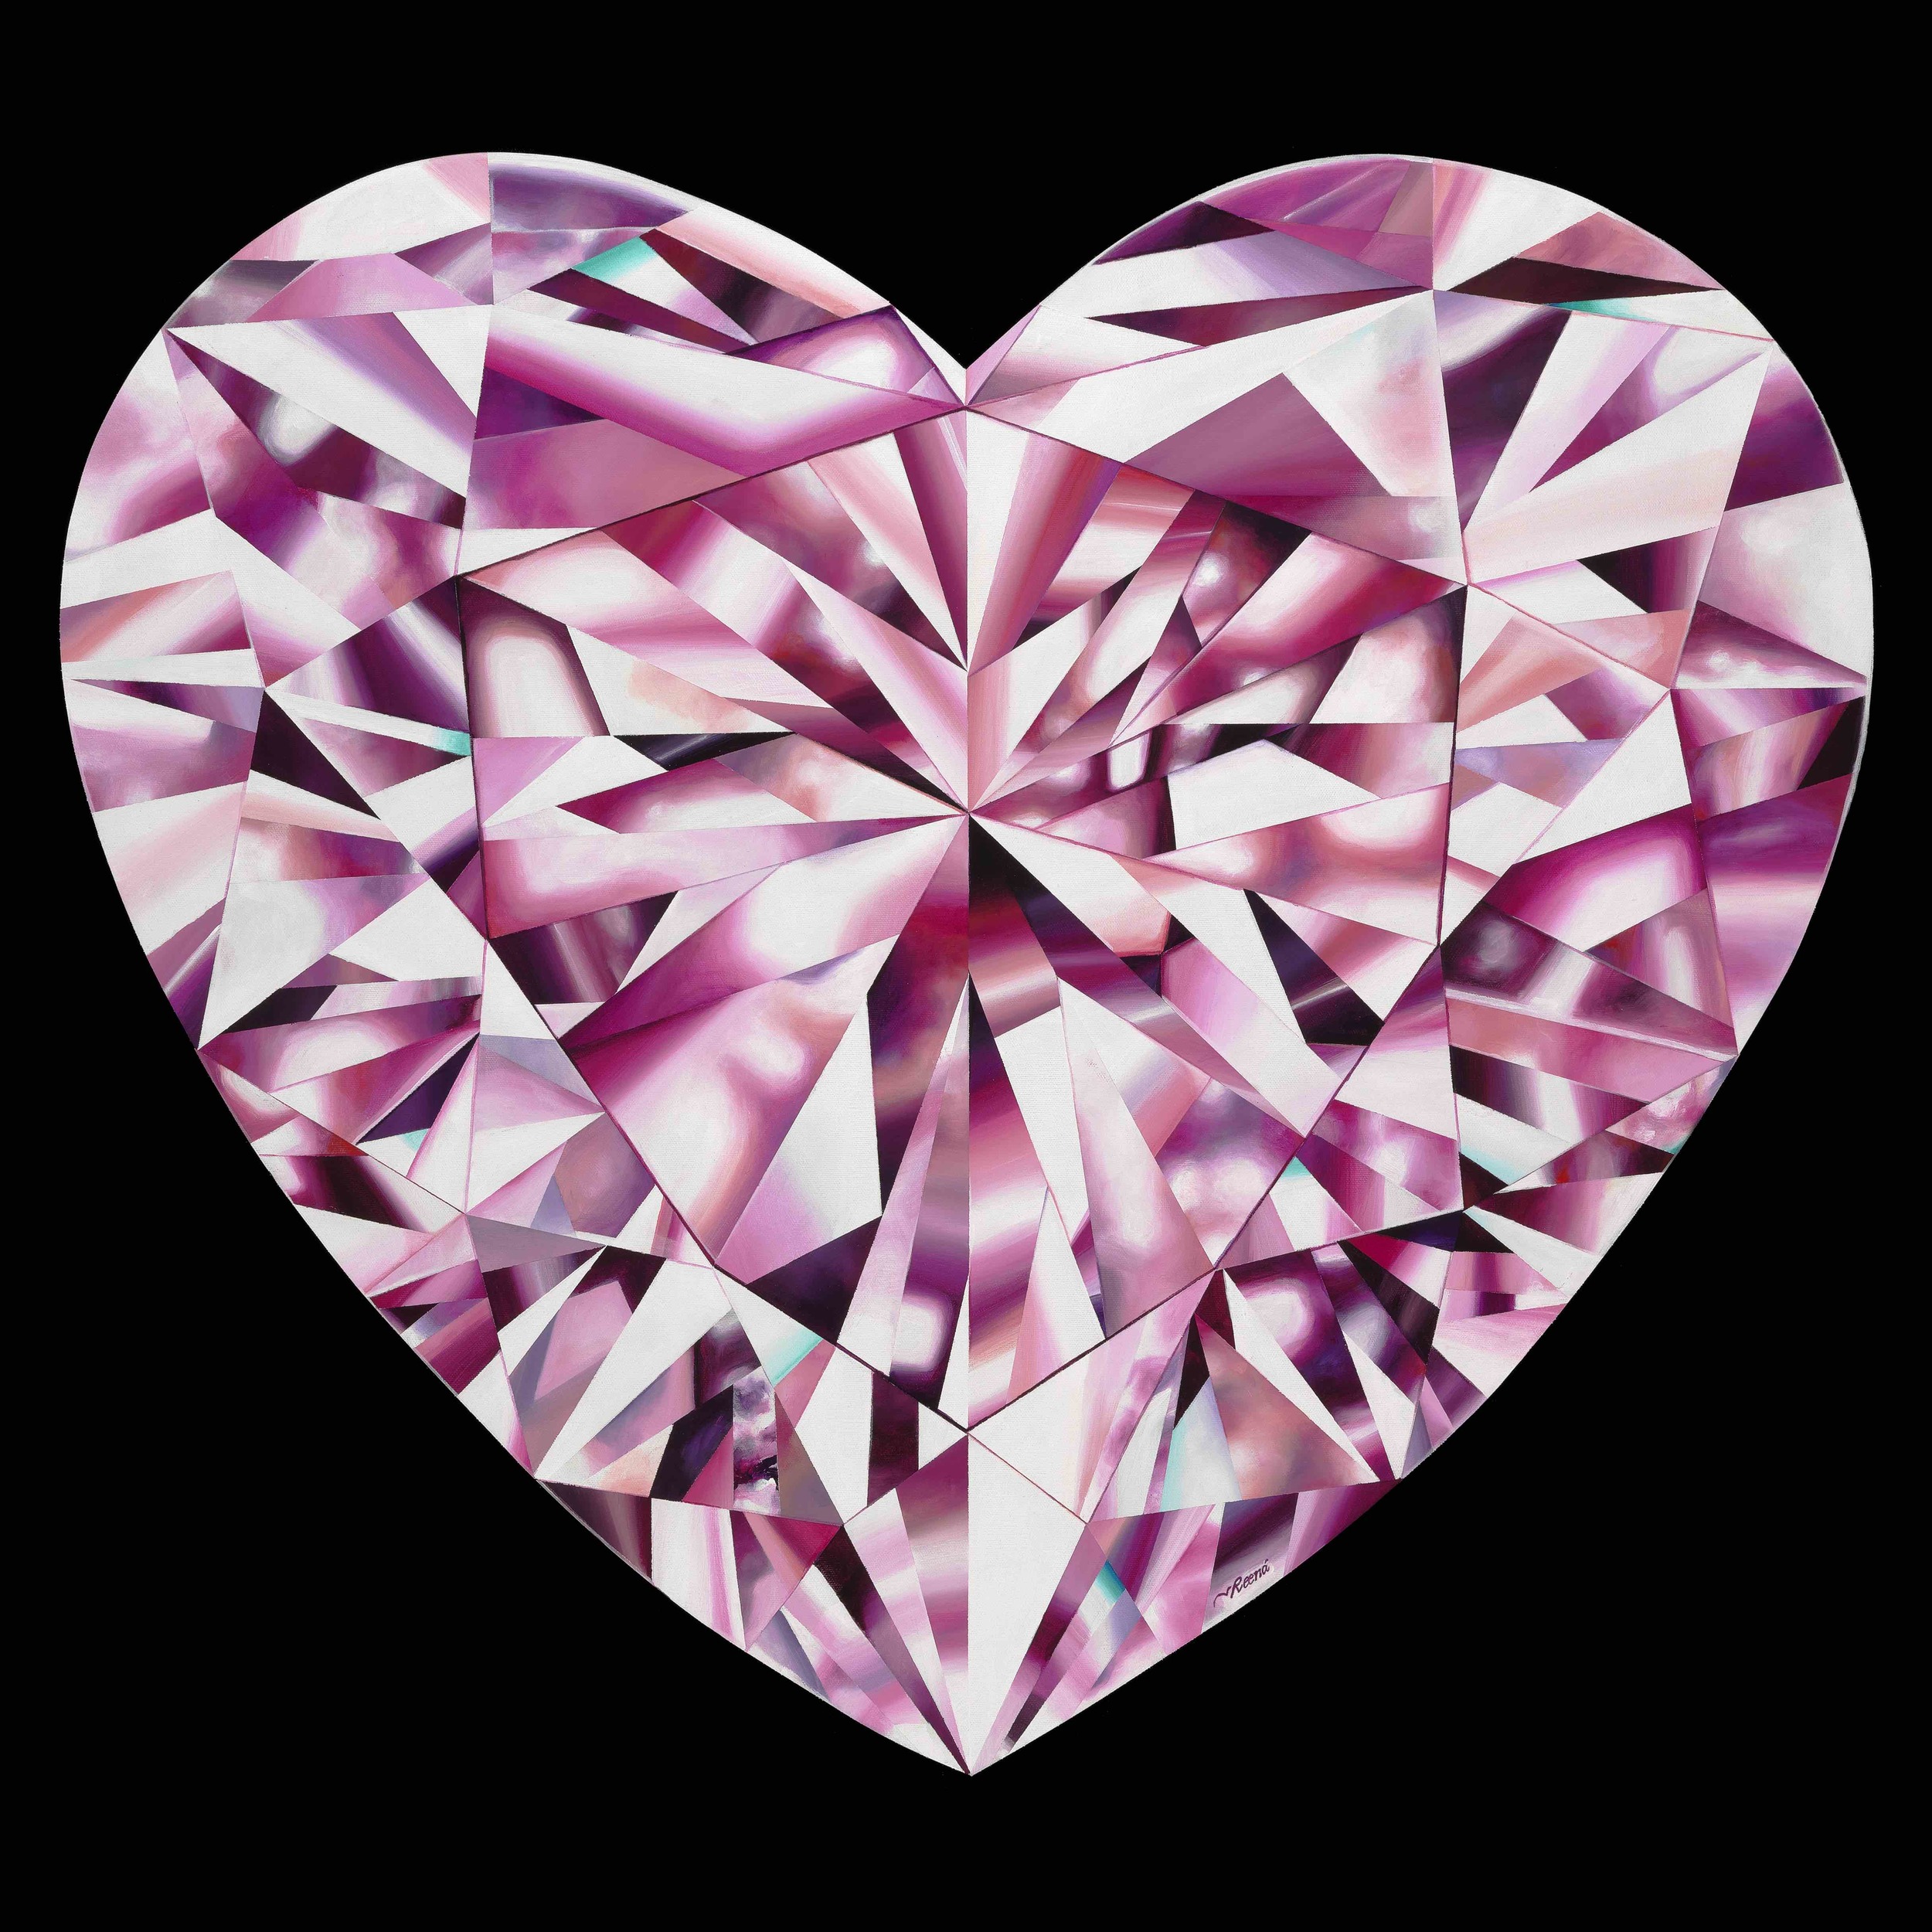 Passionate Heart - A Pink Heart-Shaped Diamond Painting By Reena